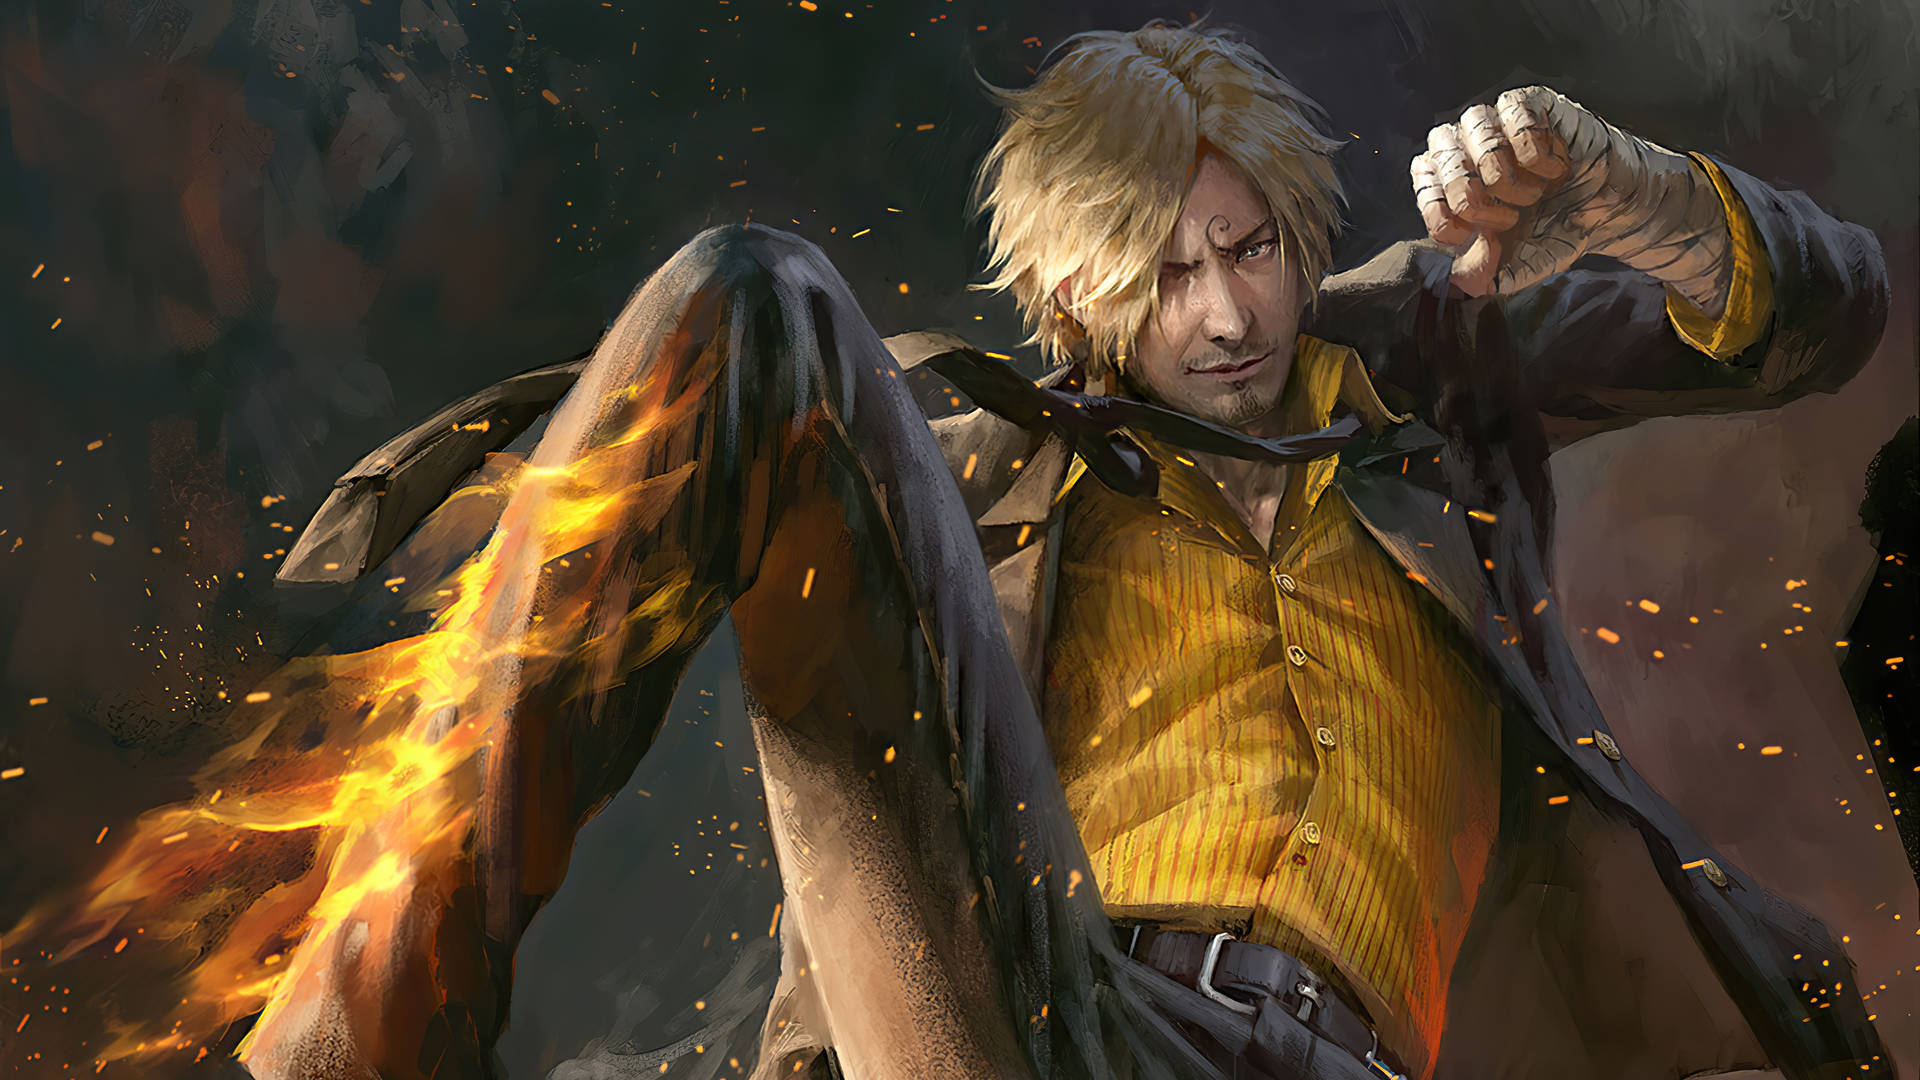 Enjoy this 3D rendering of Sanji, a character from the popular anime show, One Piece. Wallpaper